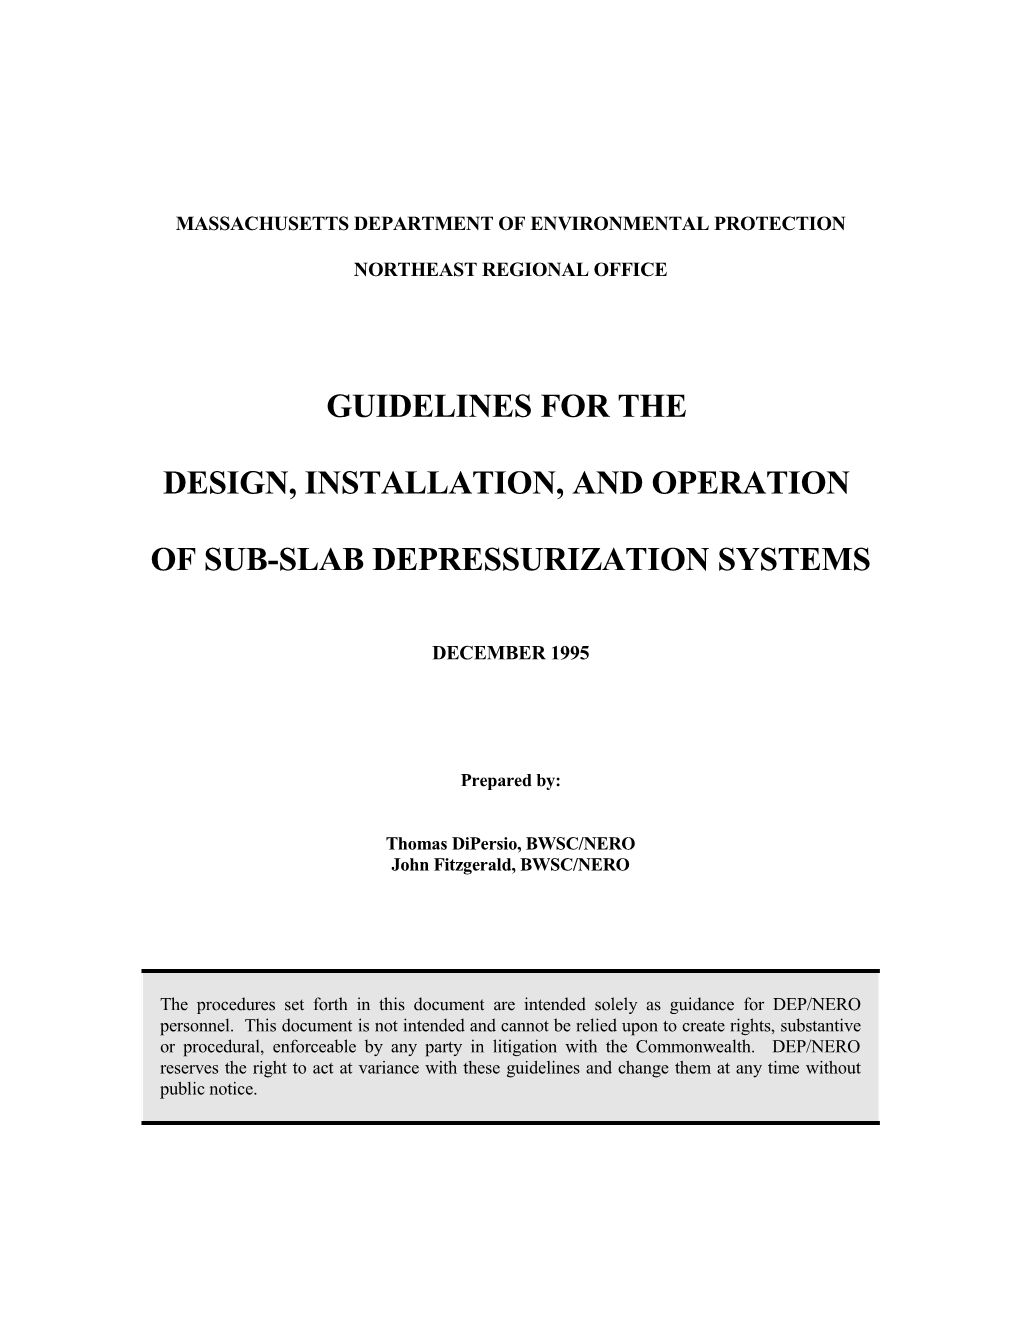 Guidelines for the Design, Installation and Operation of Sub-Slab Depressurization Systems